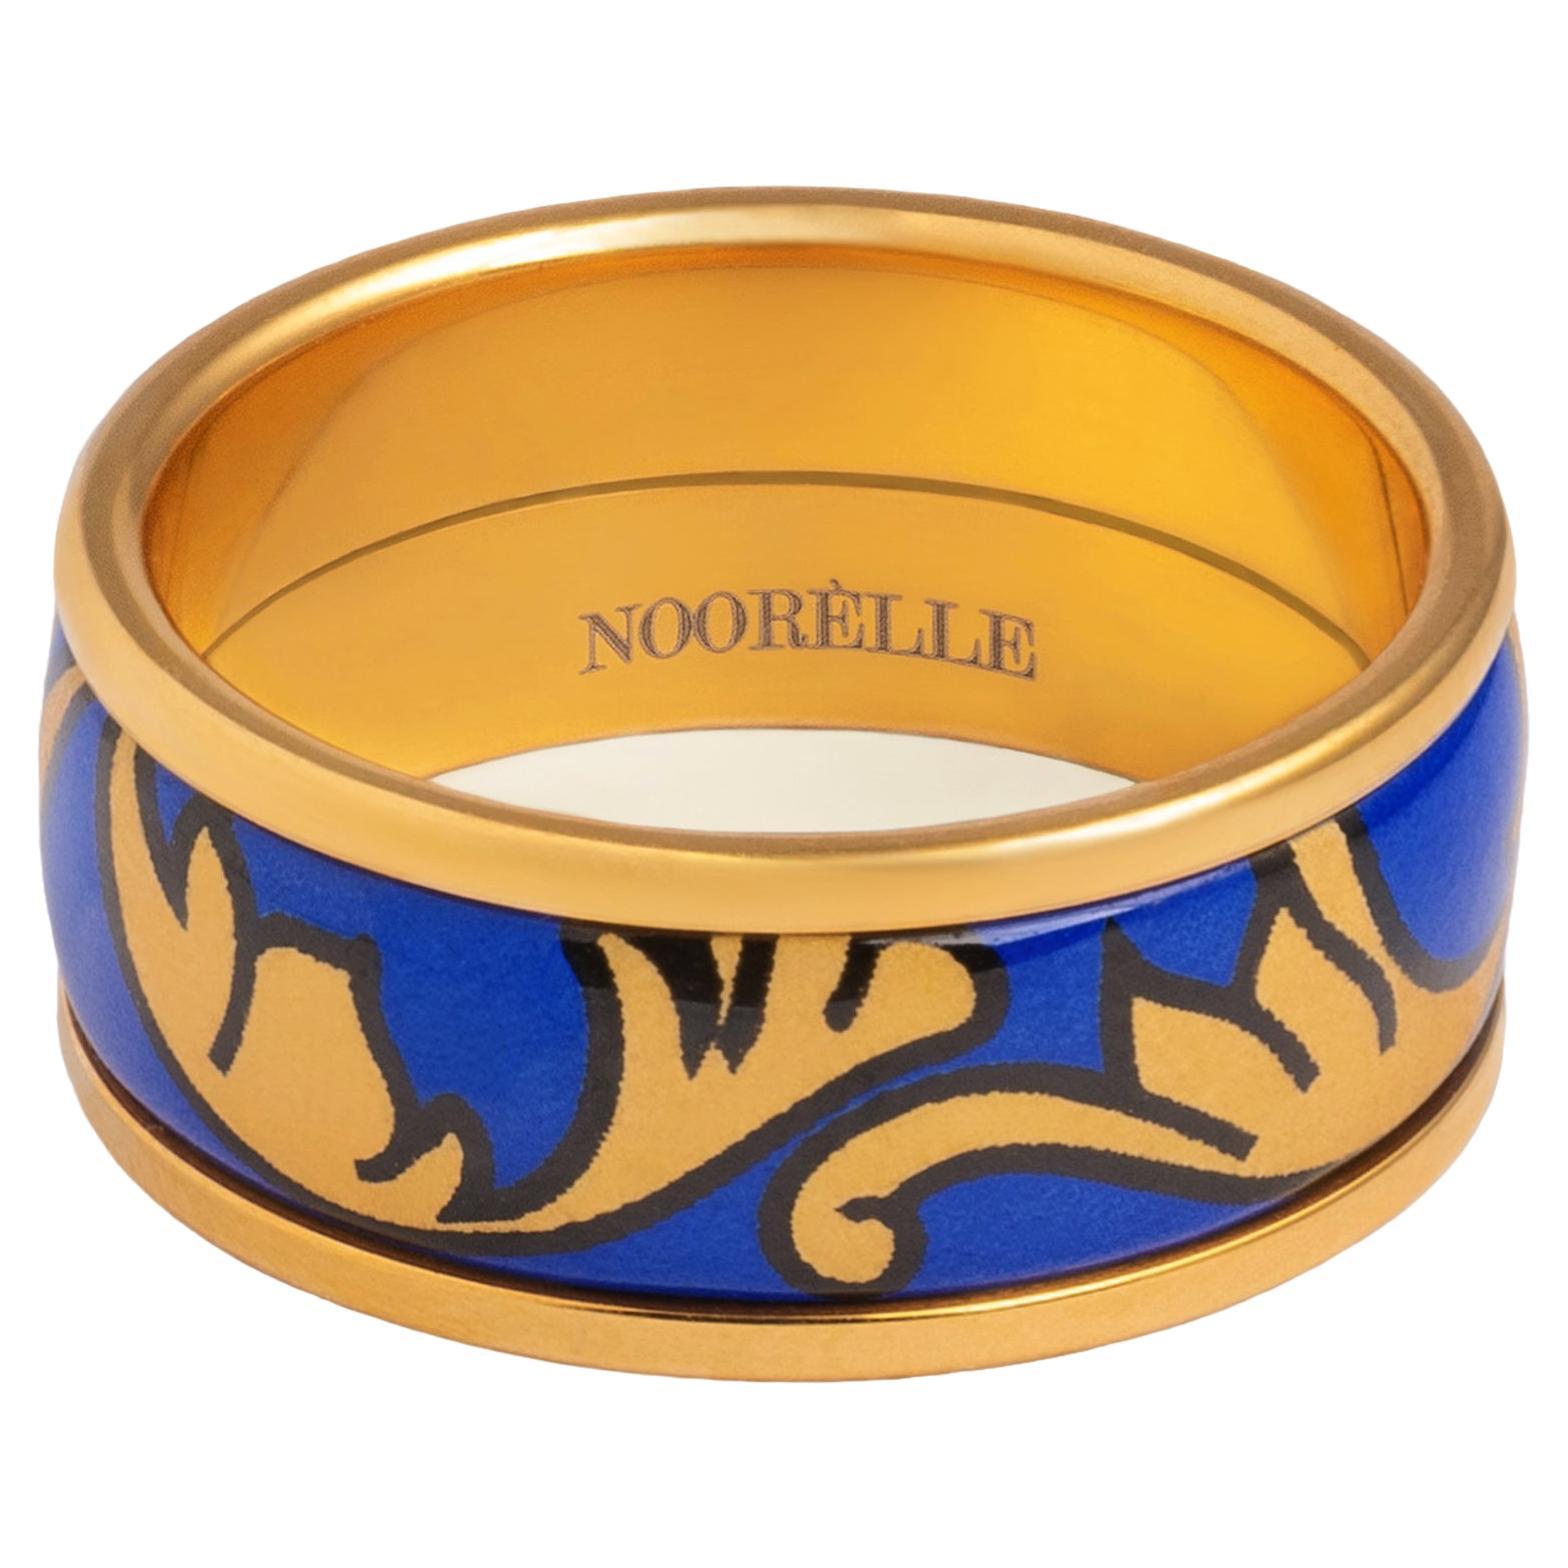 For Sale:  Blue Hand-Painted Gold-Plated Stainless Steel Band Ring with Fire Enamel Detail